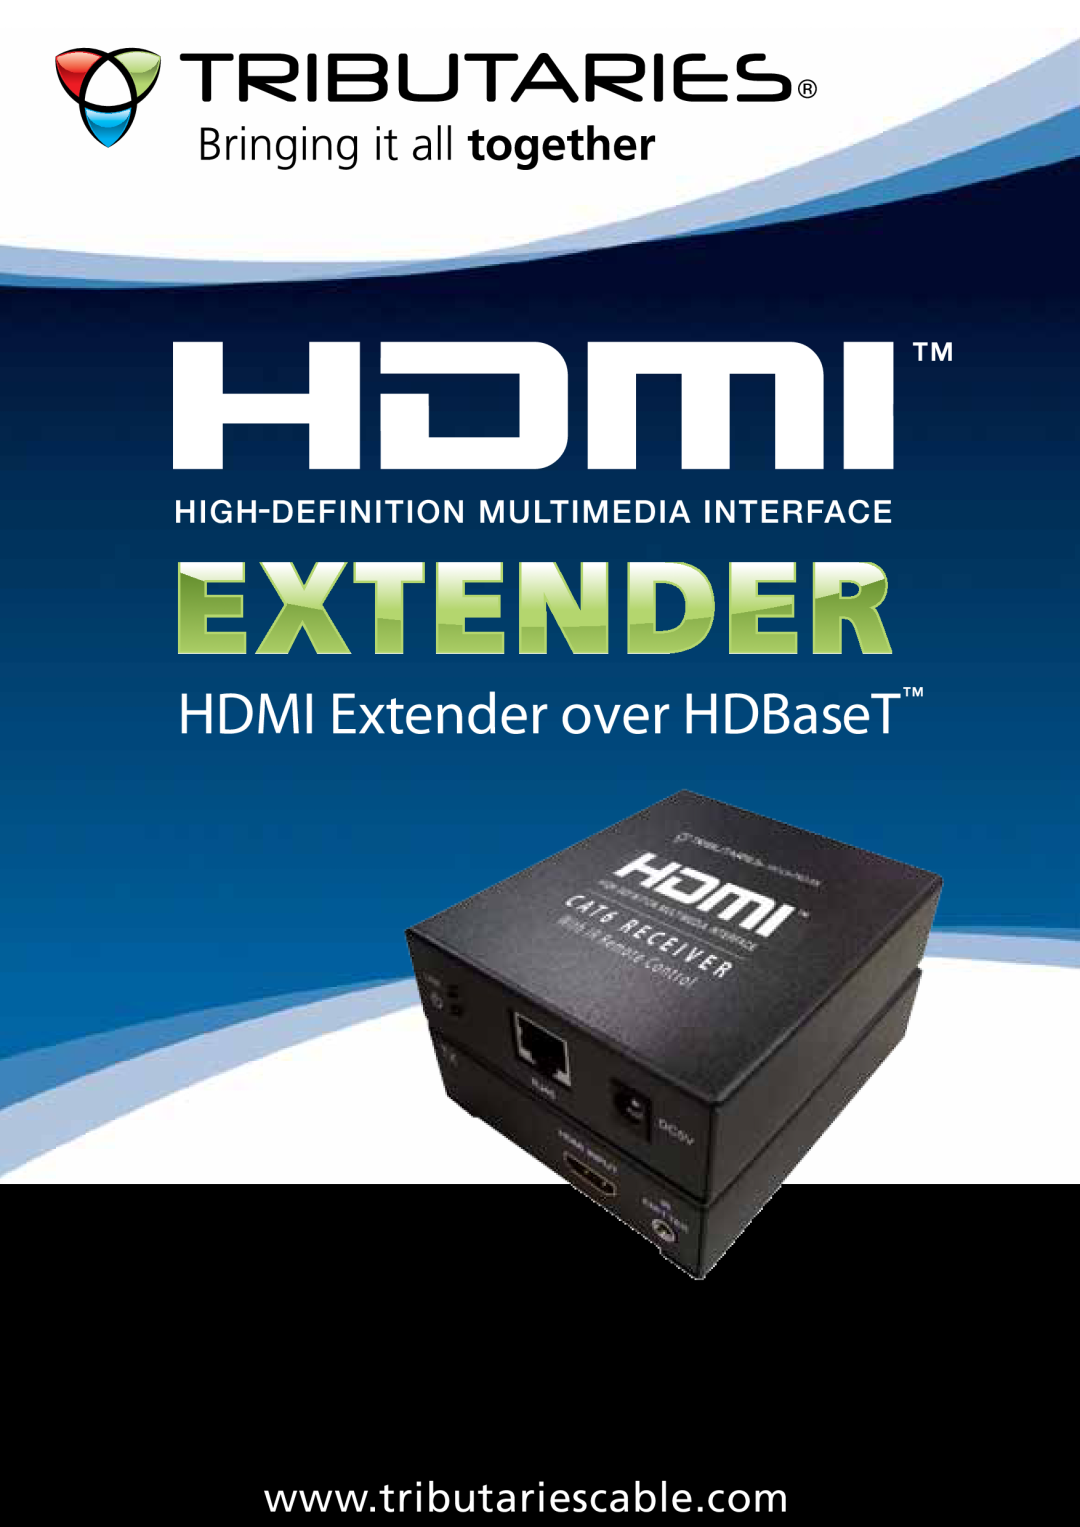 Tributaries HX1C6-PRO manual HDMI Extender over HDBaseT, Extends HDMI 300 feet over one CAT6 